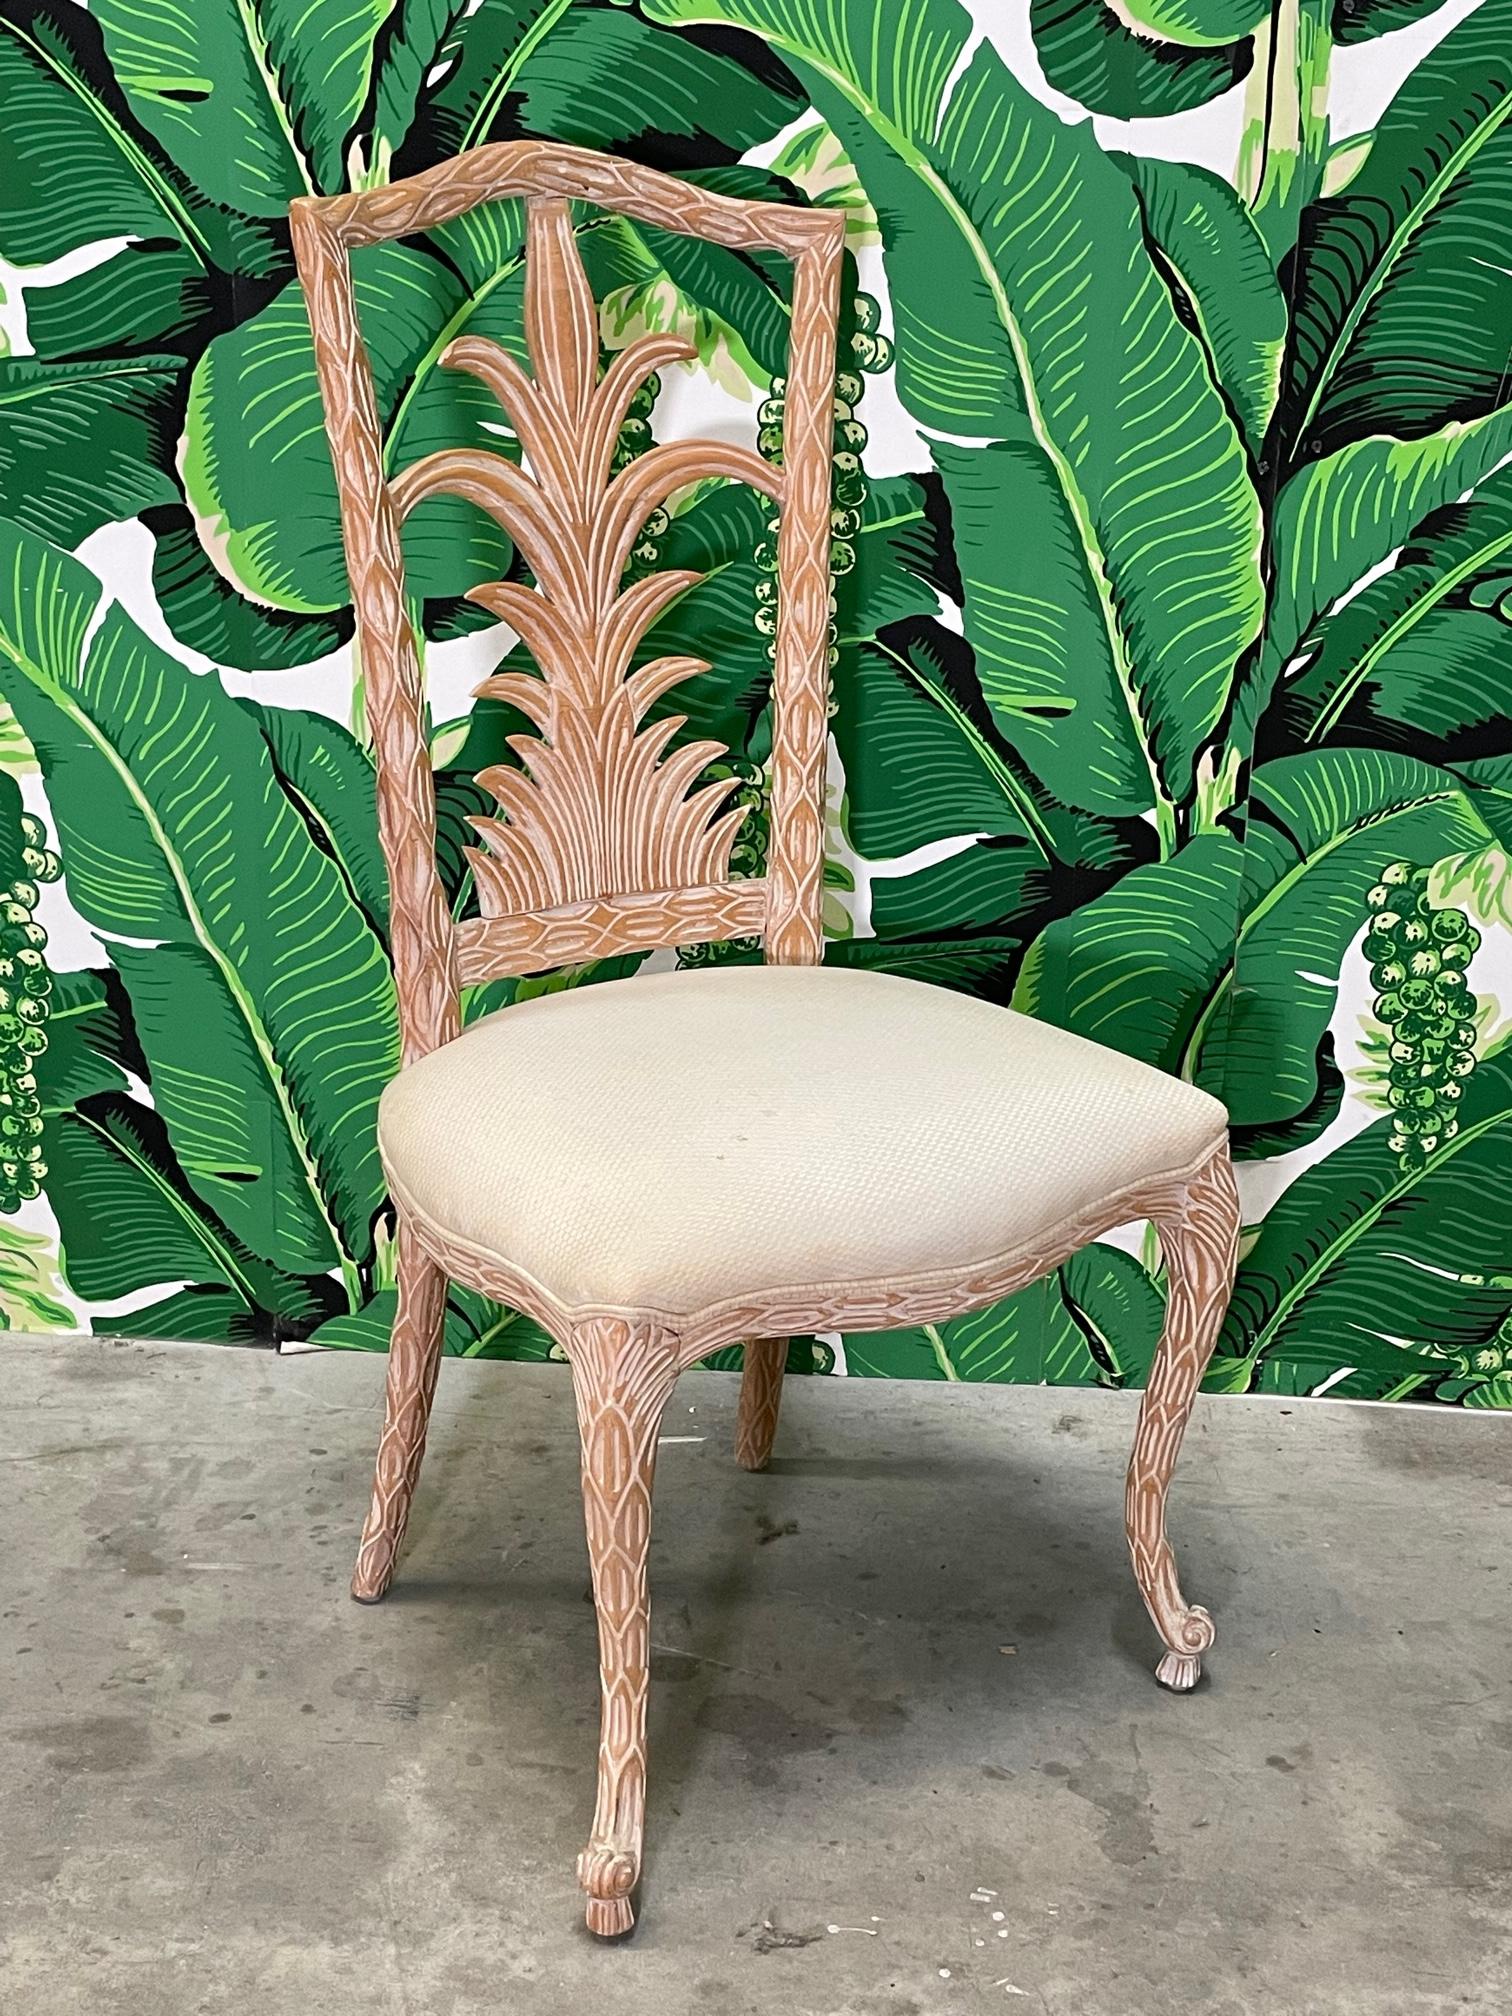 Set of six dining chairs feature faux bois style carved wood frames with a palm tree motif and splayed legs. Good condition with imperfections consistent with age, see photos for condition details. 
 White glove delivery is available to most of the